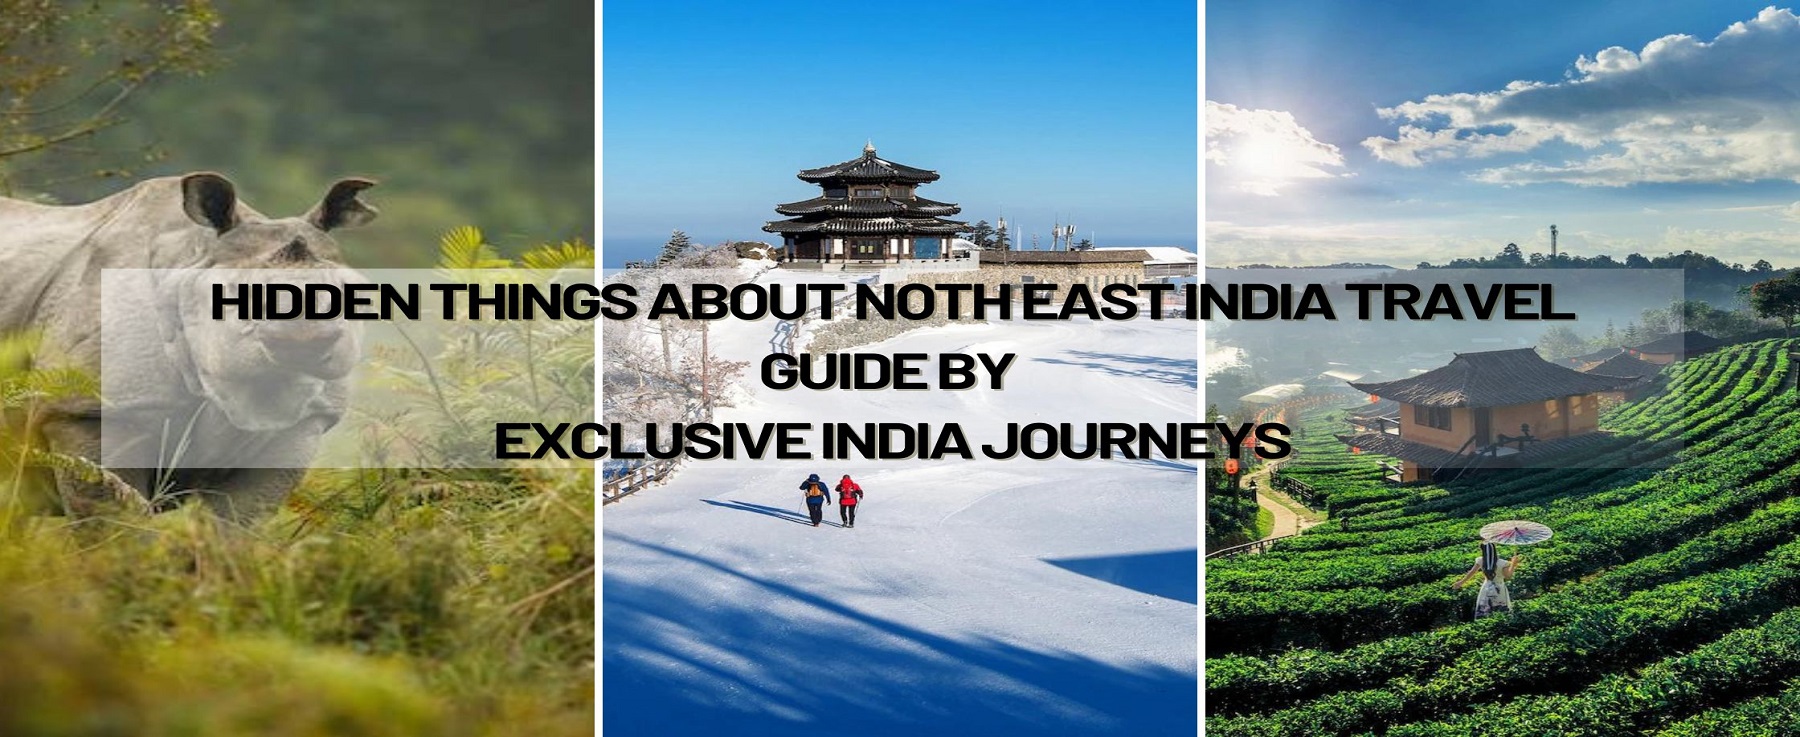 Hidden Things About The North East India - Travel Guide